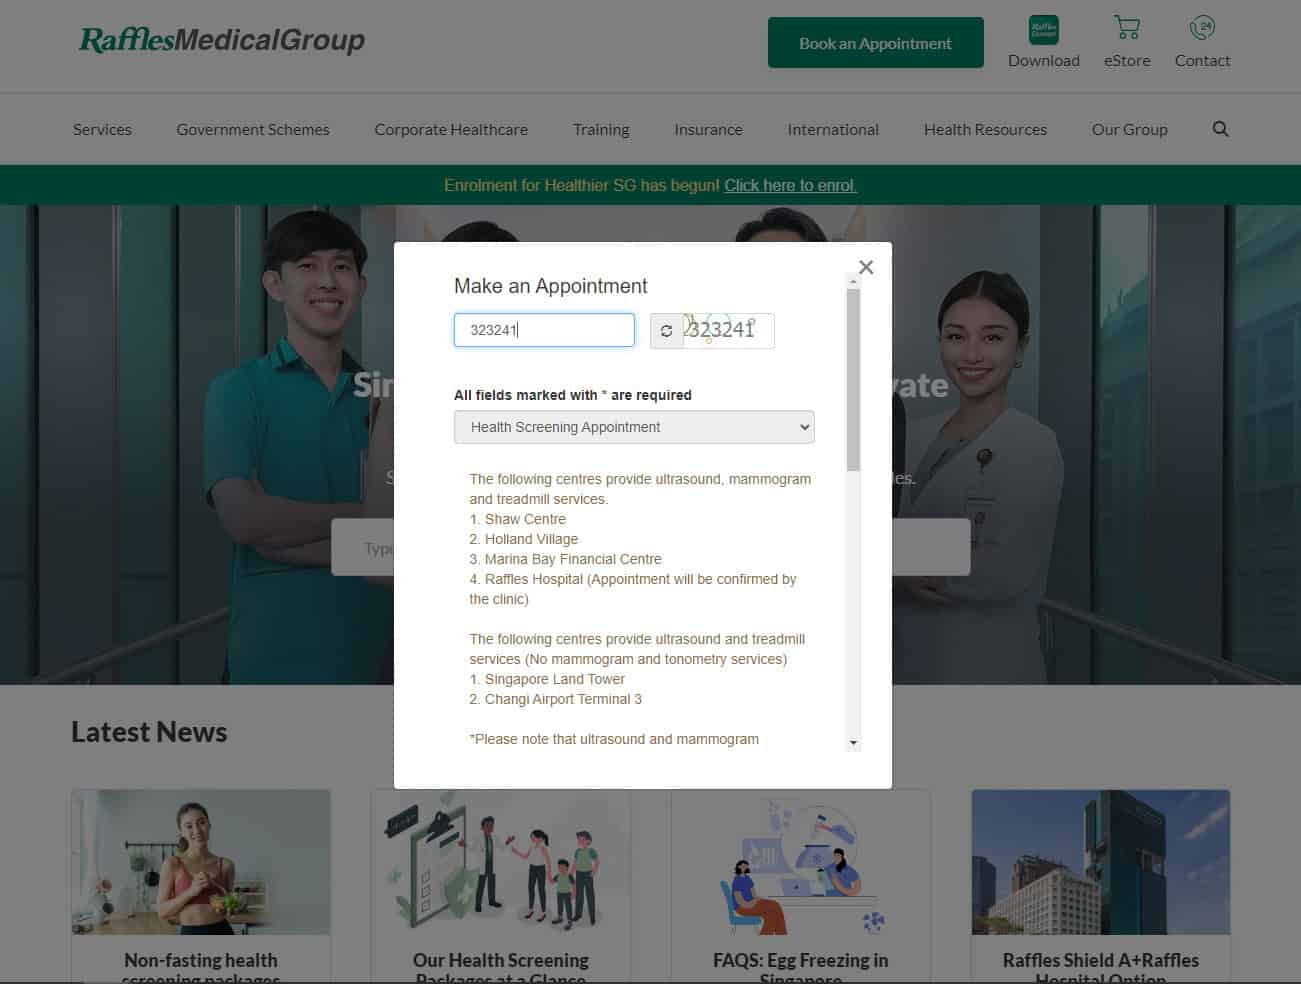 rafflesmedicalgroup.com website appointment booking solve gatcha